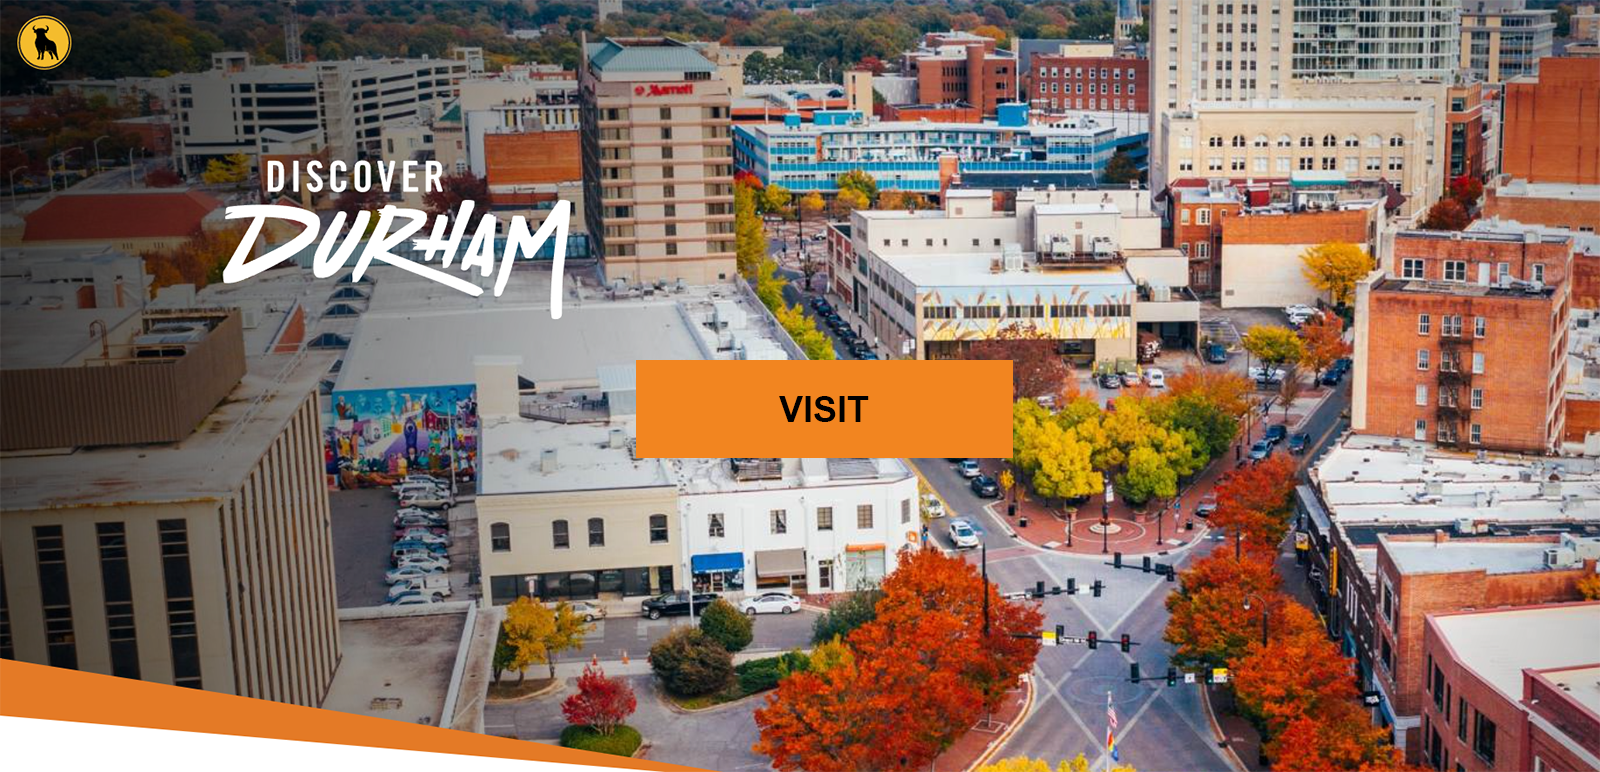 Discover Durham - Arial view of downtown Durham